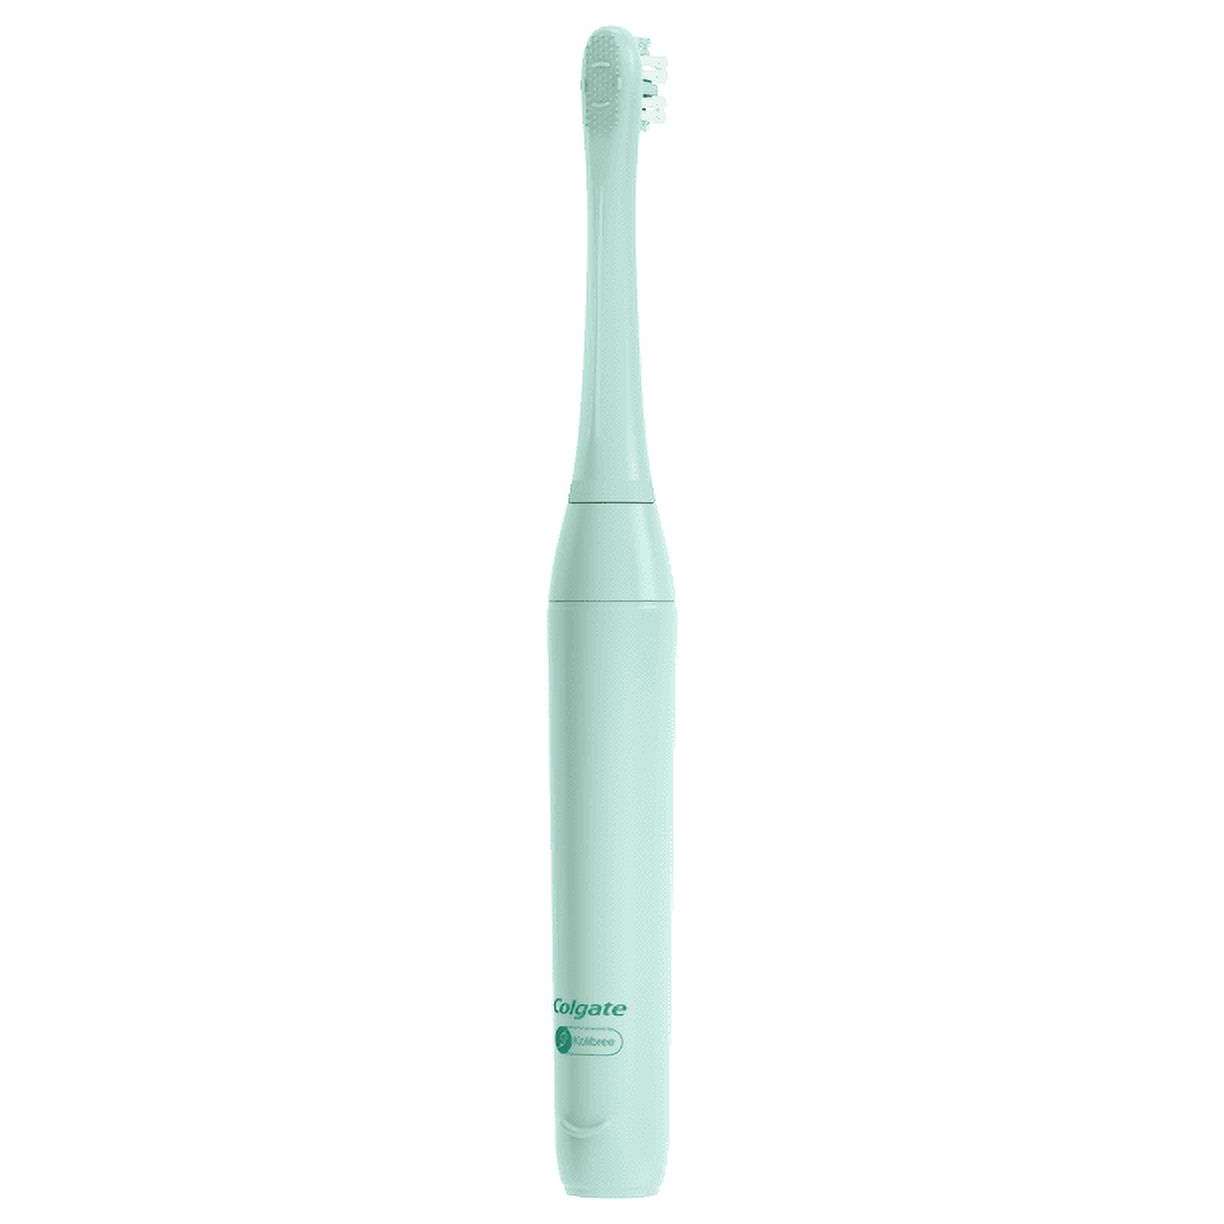 hum by Colgate Smart Electric Toothbrush, Rechargeable Sonic Toothbrush with Travel Case, Teal - image 4 of 11